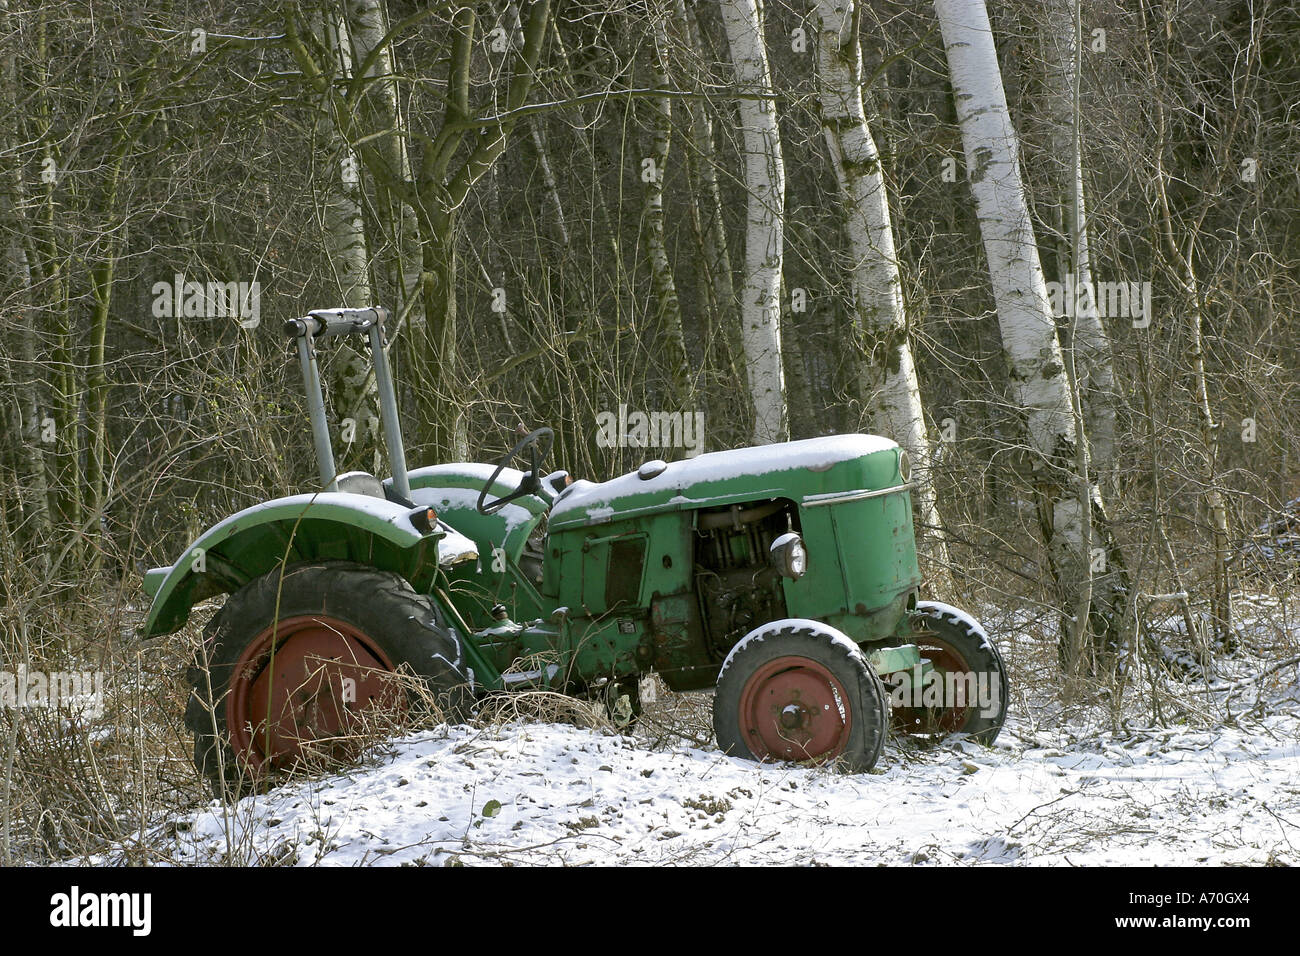 Old green Deutz vintage tractor standing forgotten in snow at the edge of a forest Stock Photo